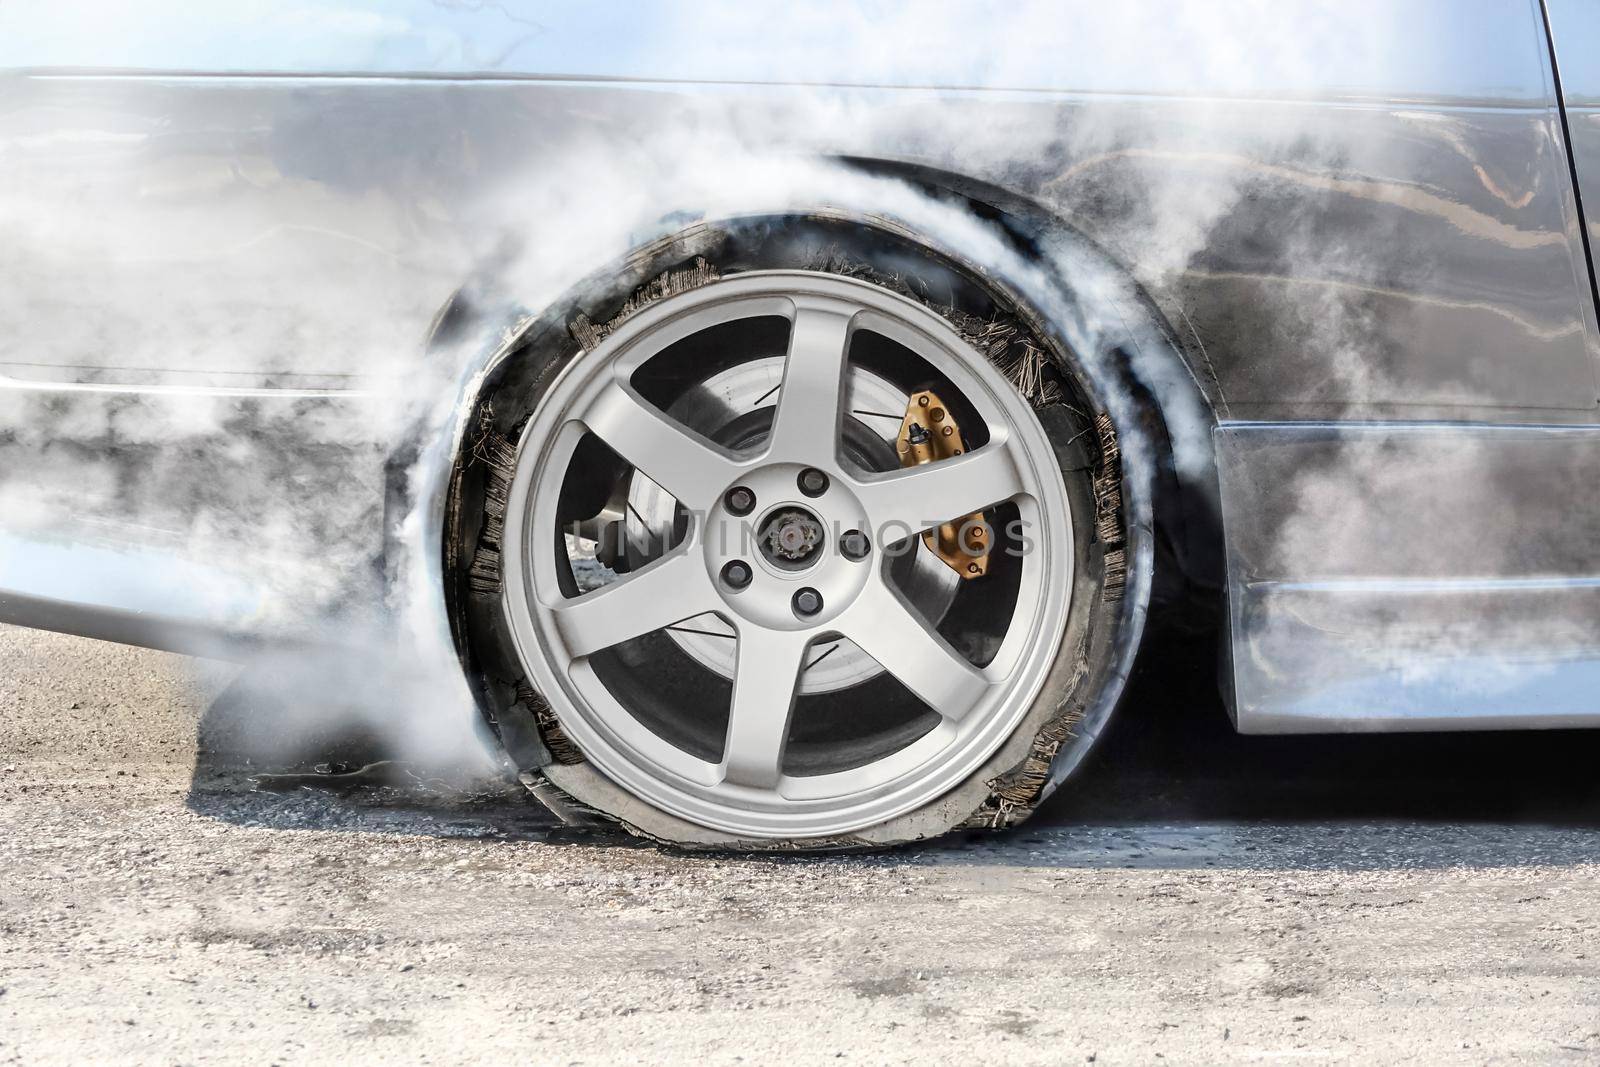 burst tire on the road by toa55